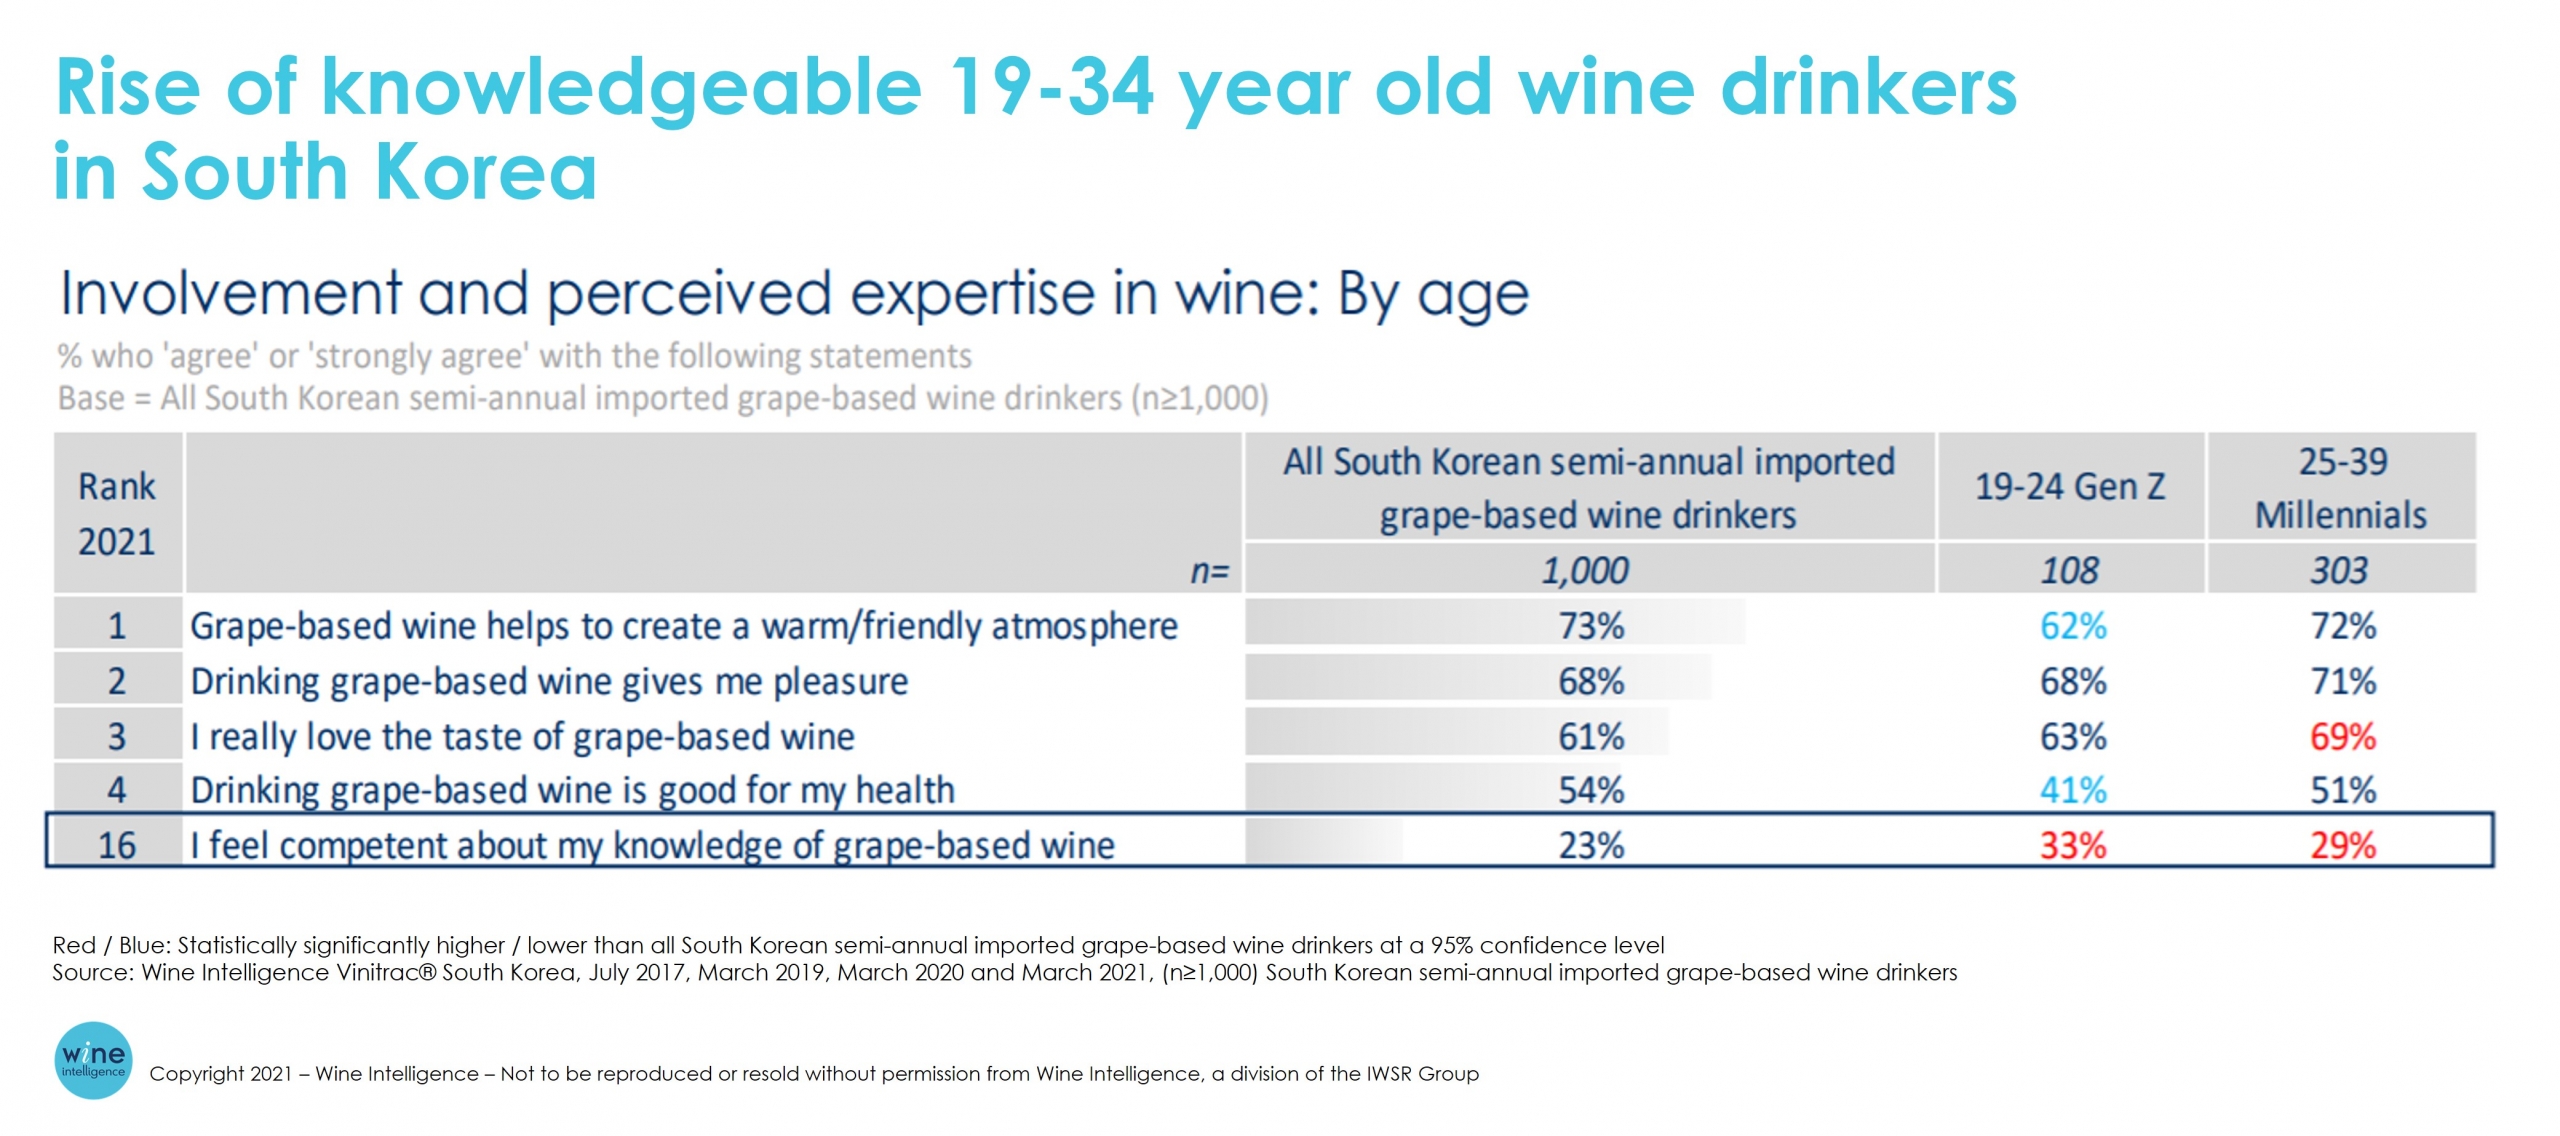 WI Chart South Korea knowledgeable wine drinkers scaled - Why is the South Korean wine market becoming more attractive to wine businesses?  